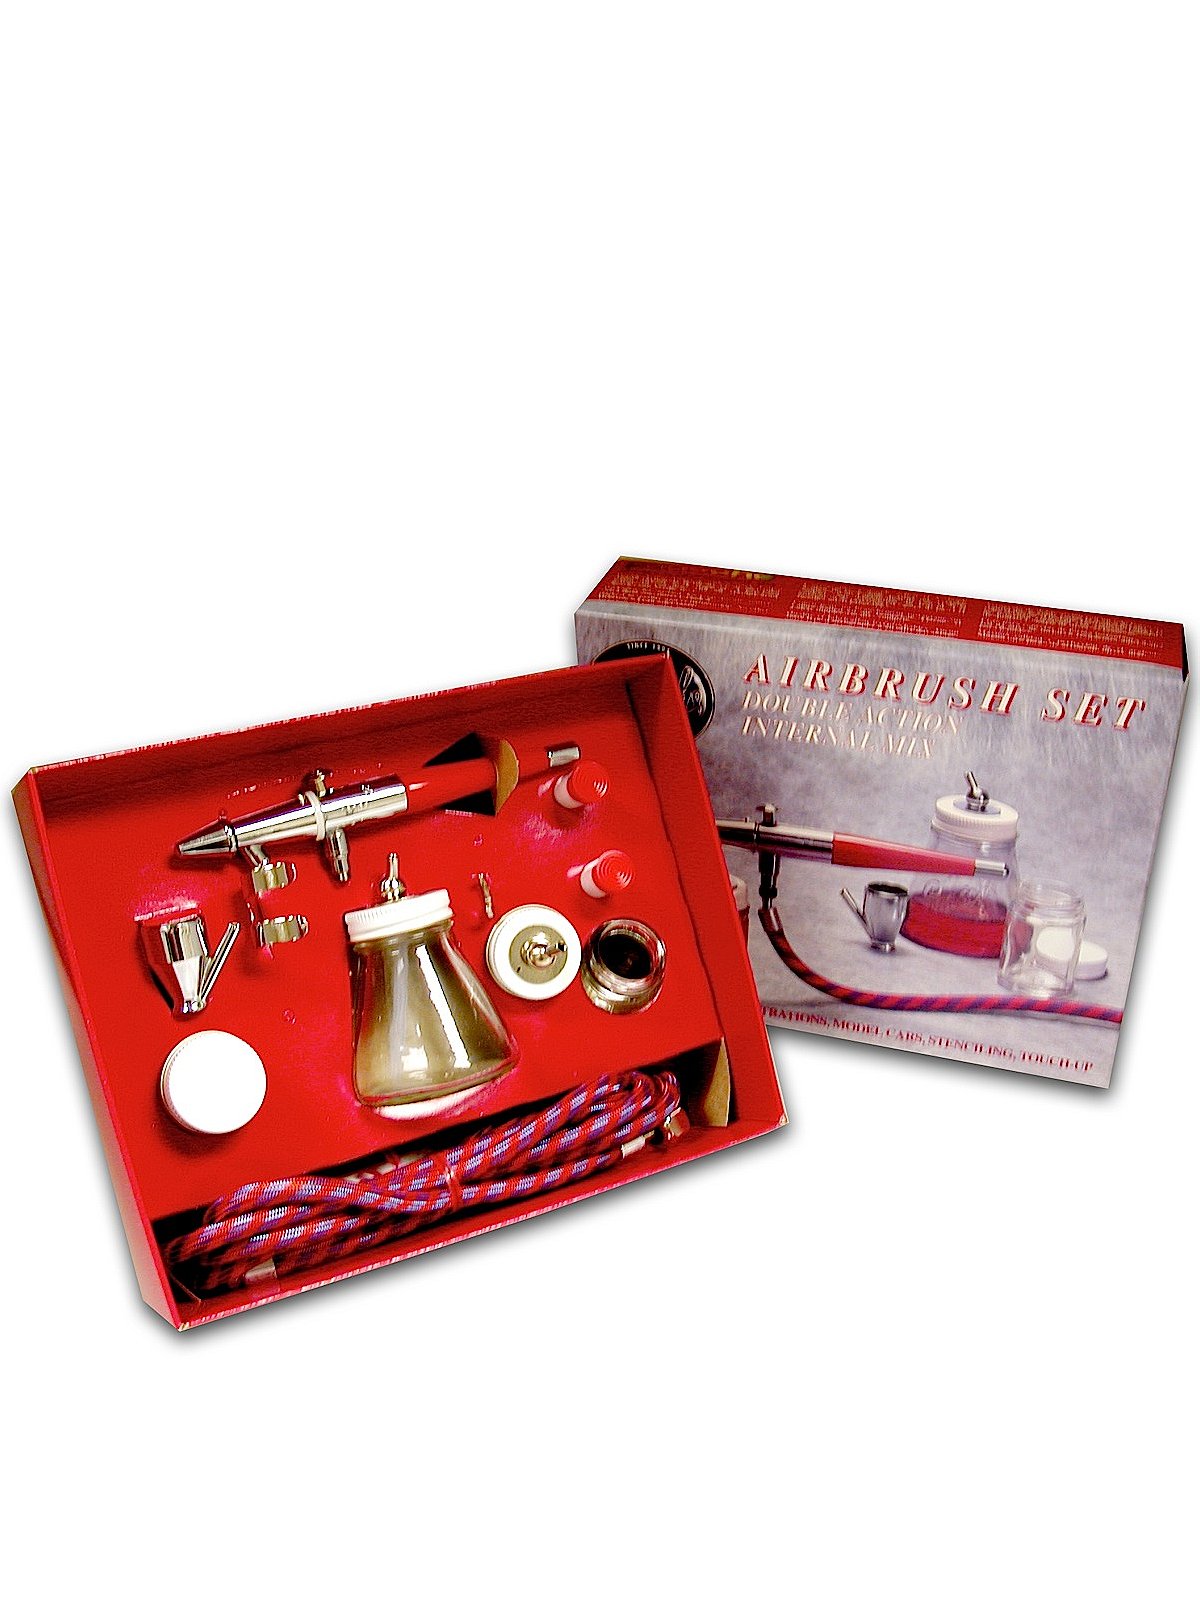 Paasche Airbrush VL-Card Airbrush Card Set, Double Action Airbrush